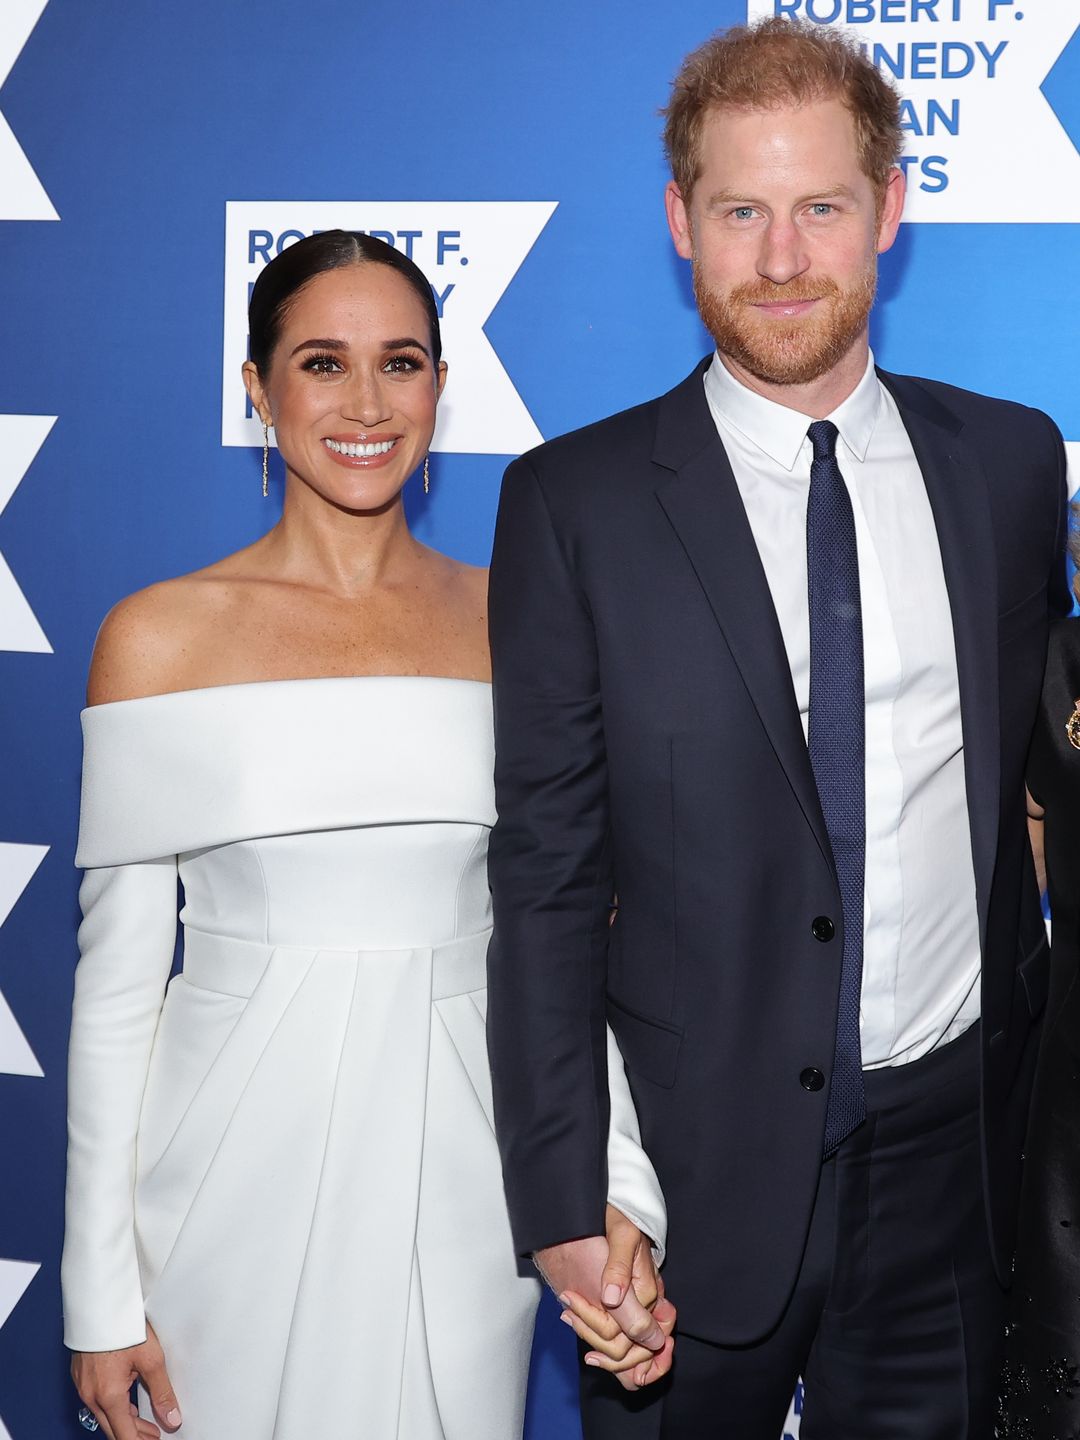 Meghan Markle in a white dress standing with Prince Harry in a suit